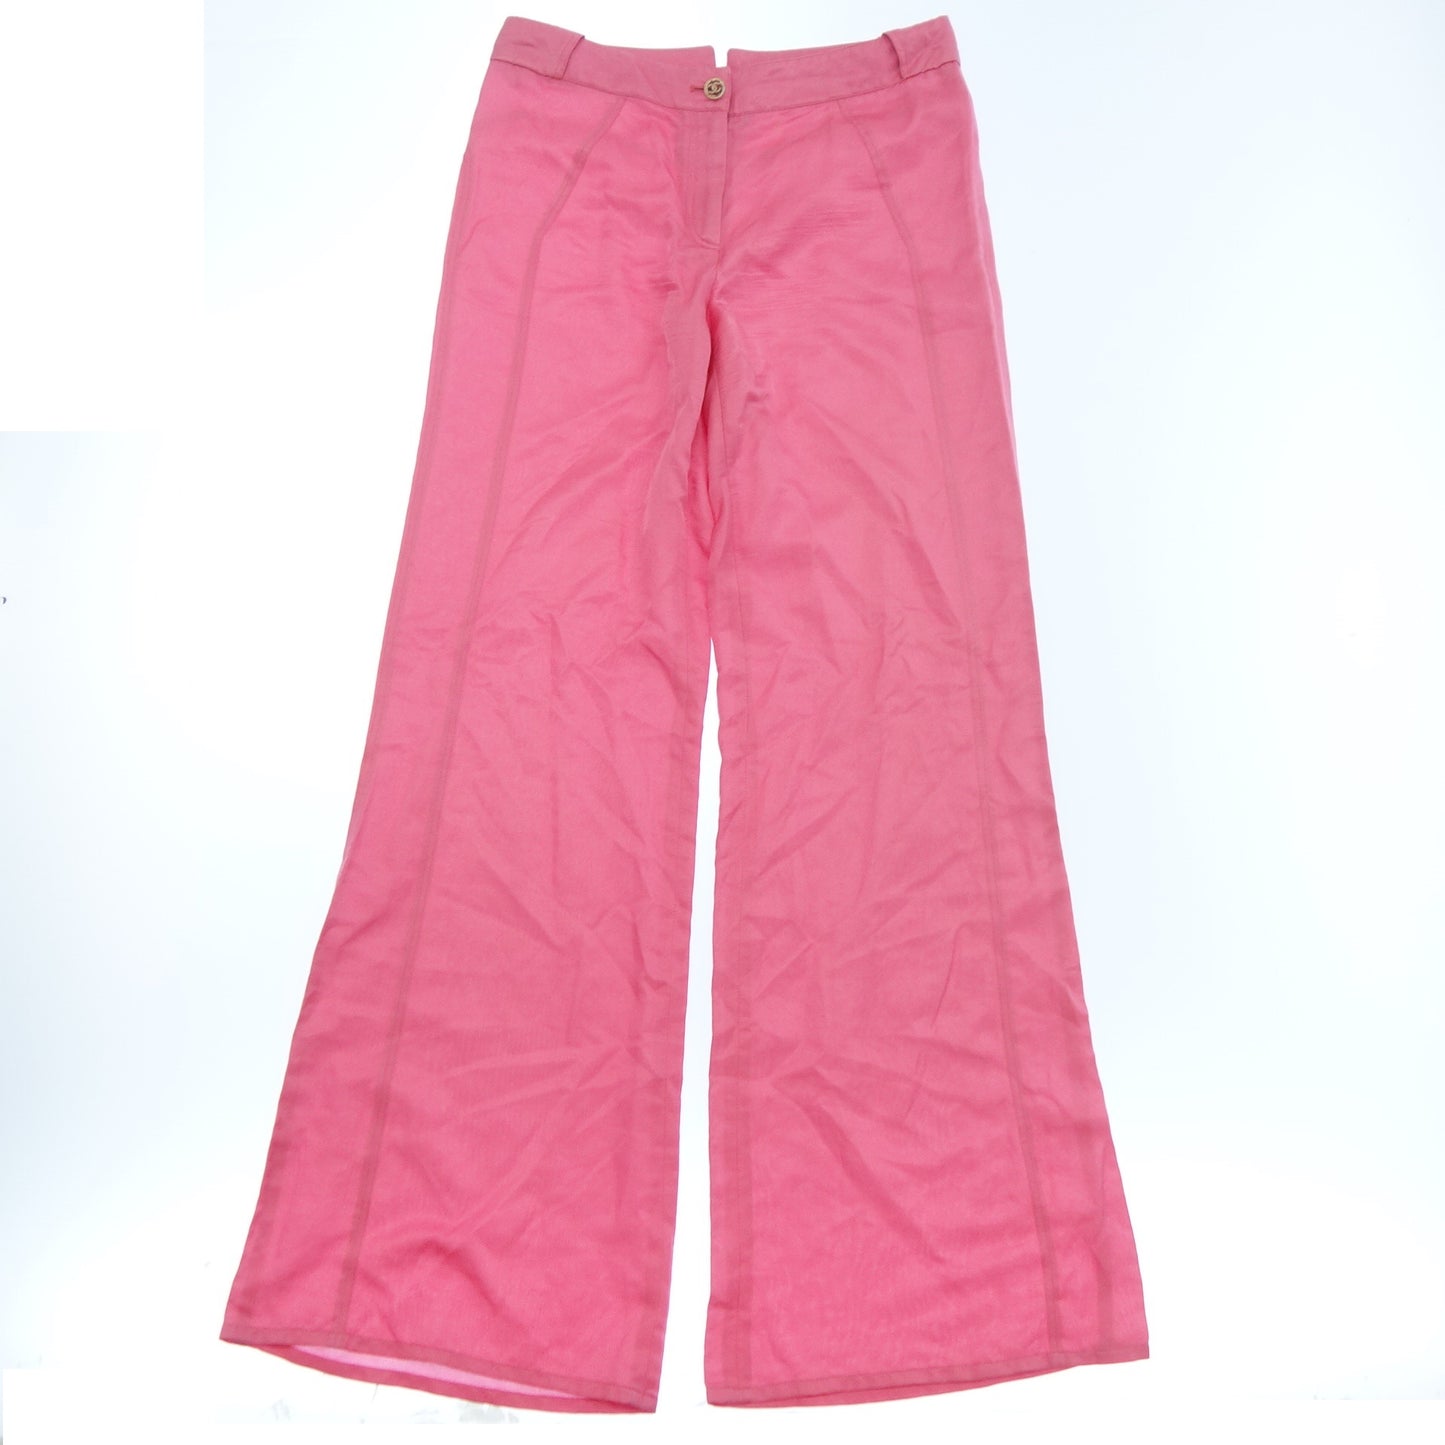 Used ◆CHANEL silk pants here mark P39 size 38 ladies pink CHANEL [AFB25] 